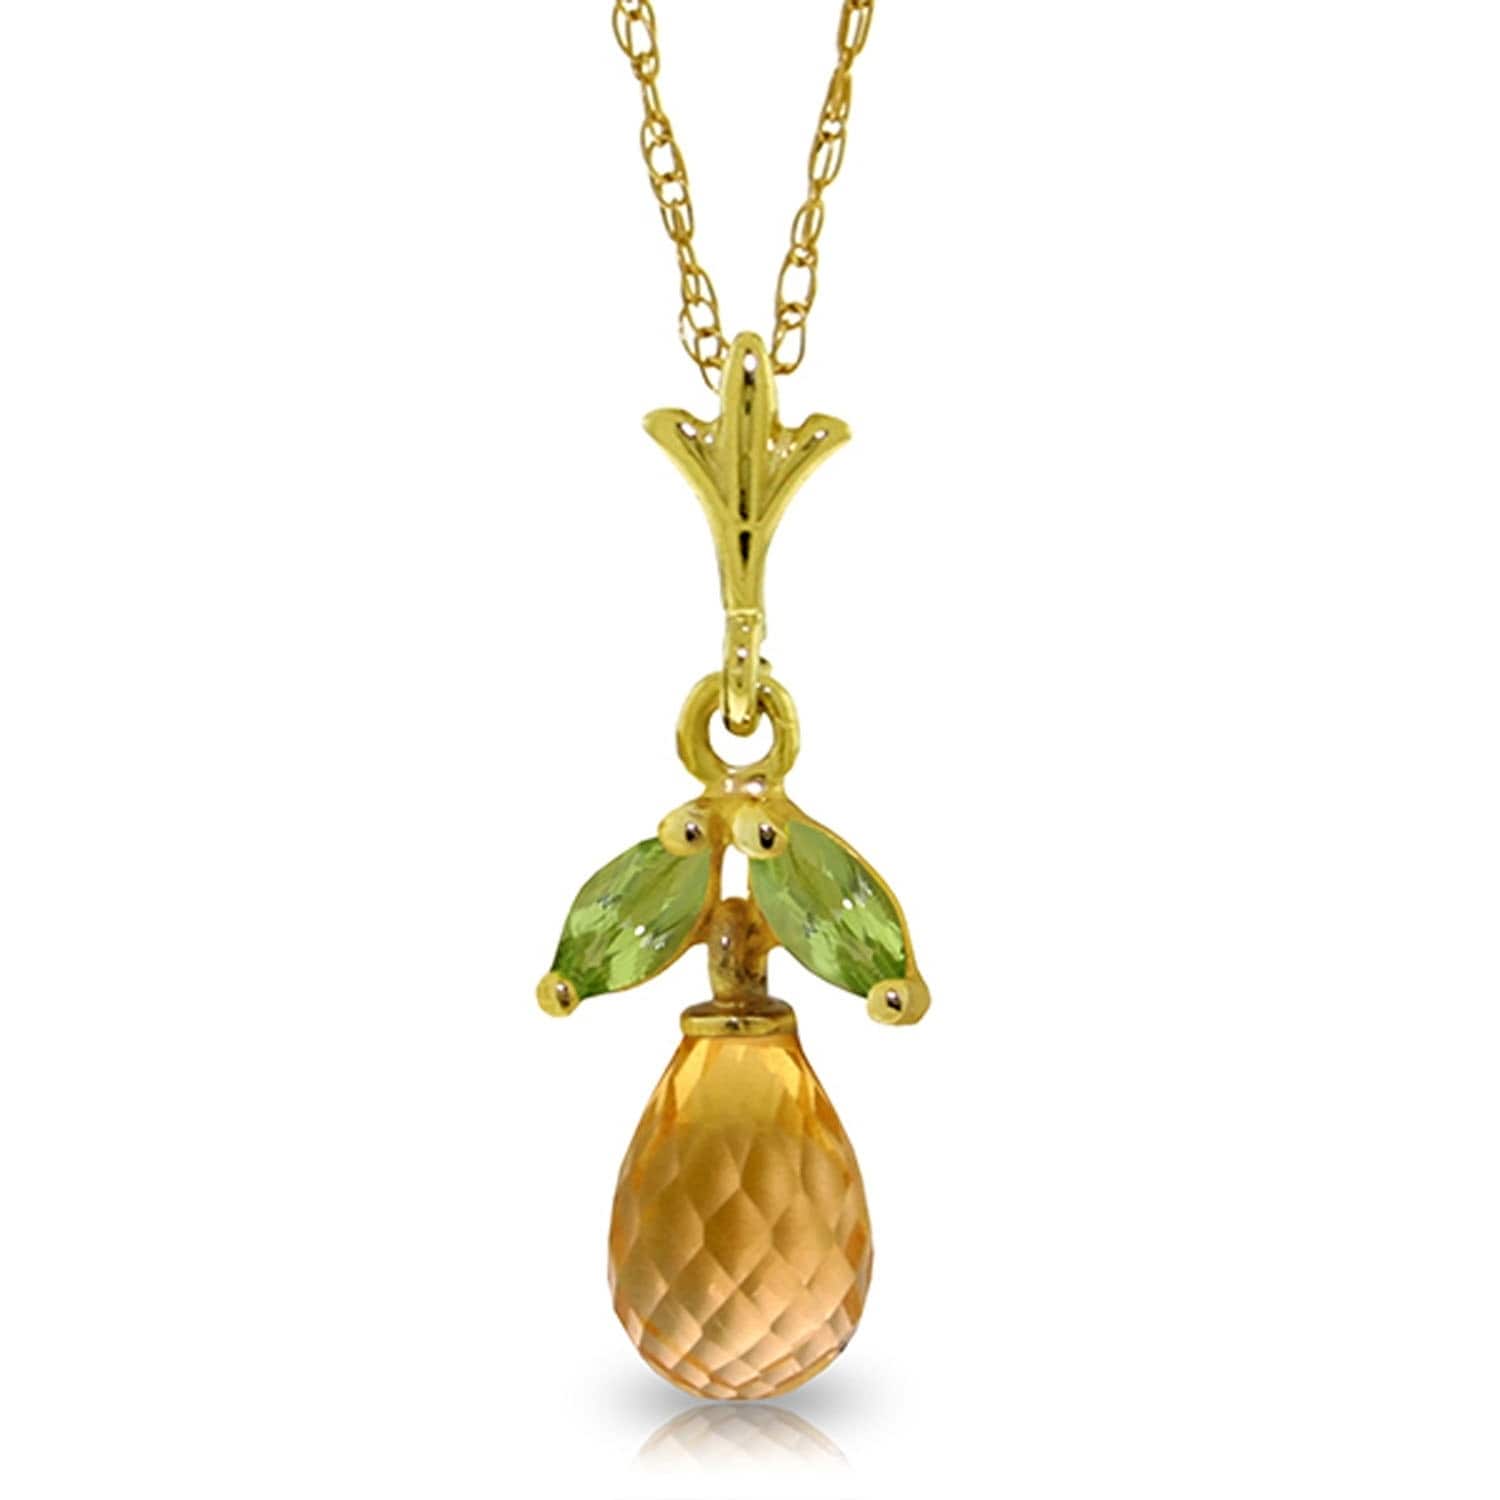 ALARRI 1.7 Carat 14K Solid Gold Acceptance Citrine Peridot Necklace with 24 Inch Chain Length 